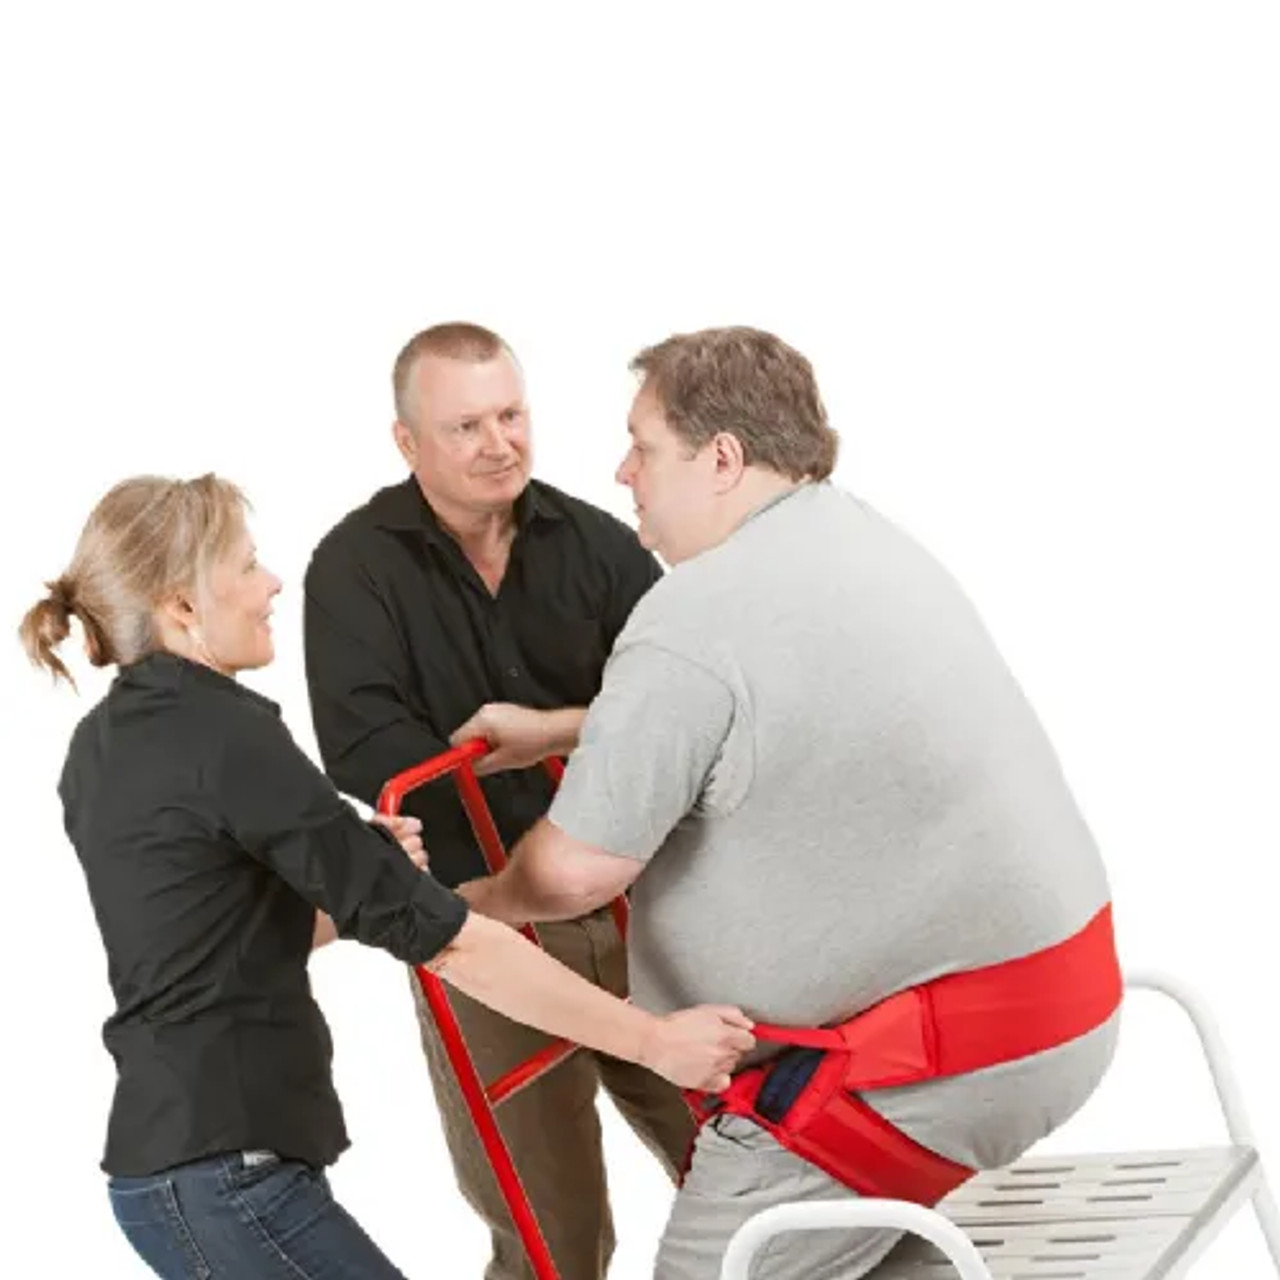 SystemRoMedic ReTurn7600 Sit-To-Stand Bariatric Transfer Assist | Comfortable-Chicken Pieces